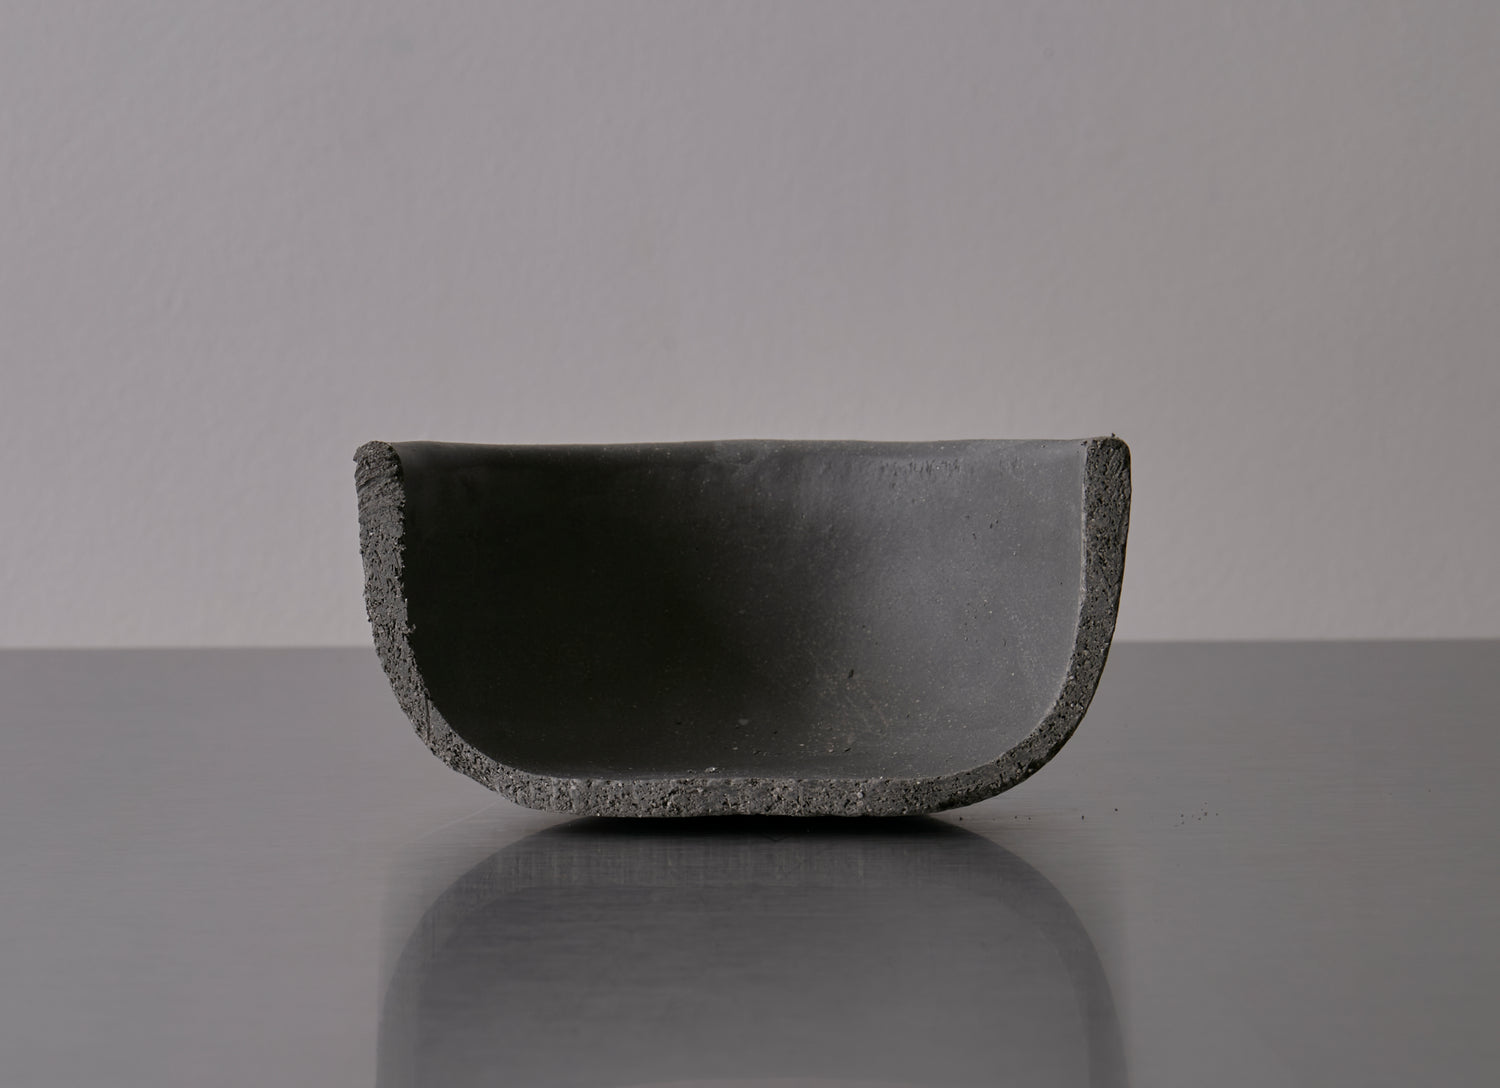 Cross-sectional view of a clay bowl that has been cut in half, highlighting how thick the walls are